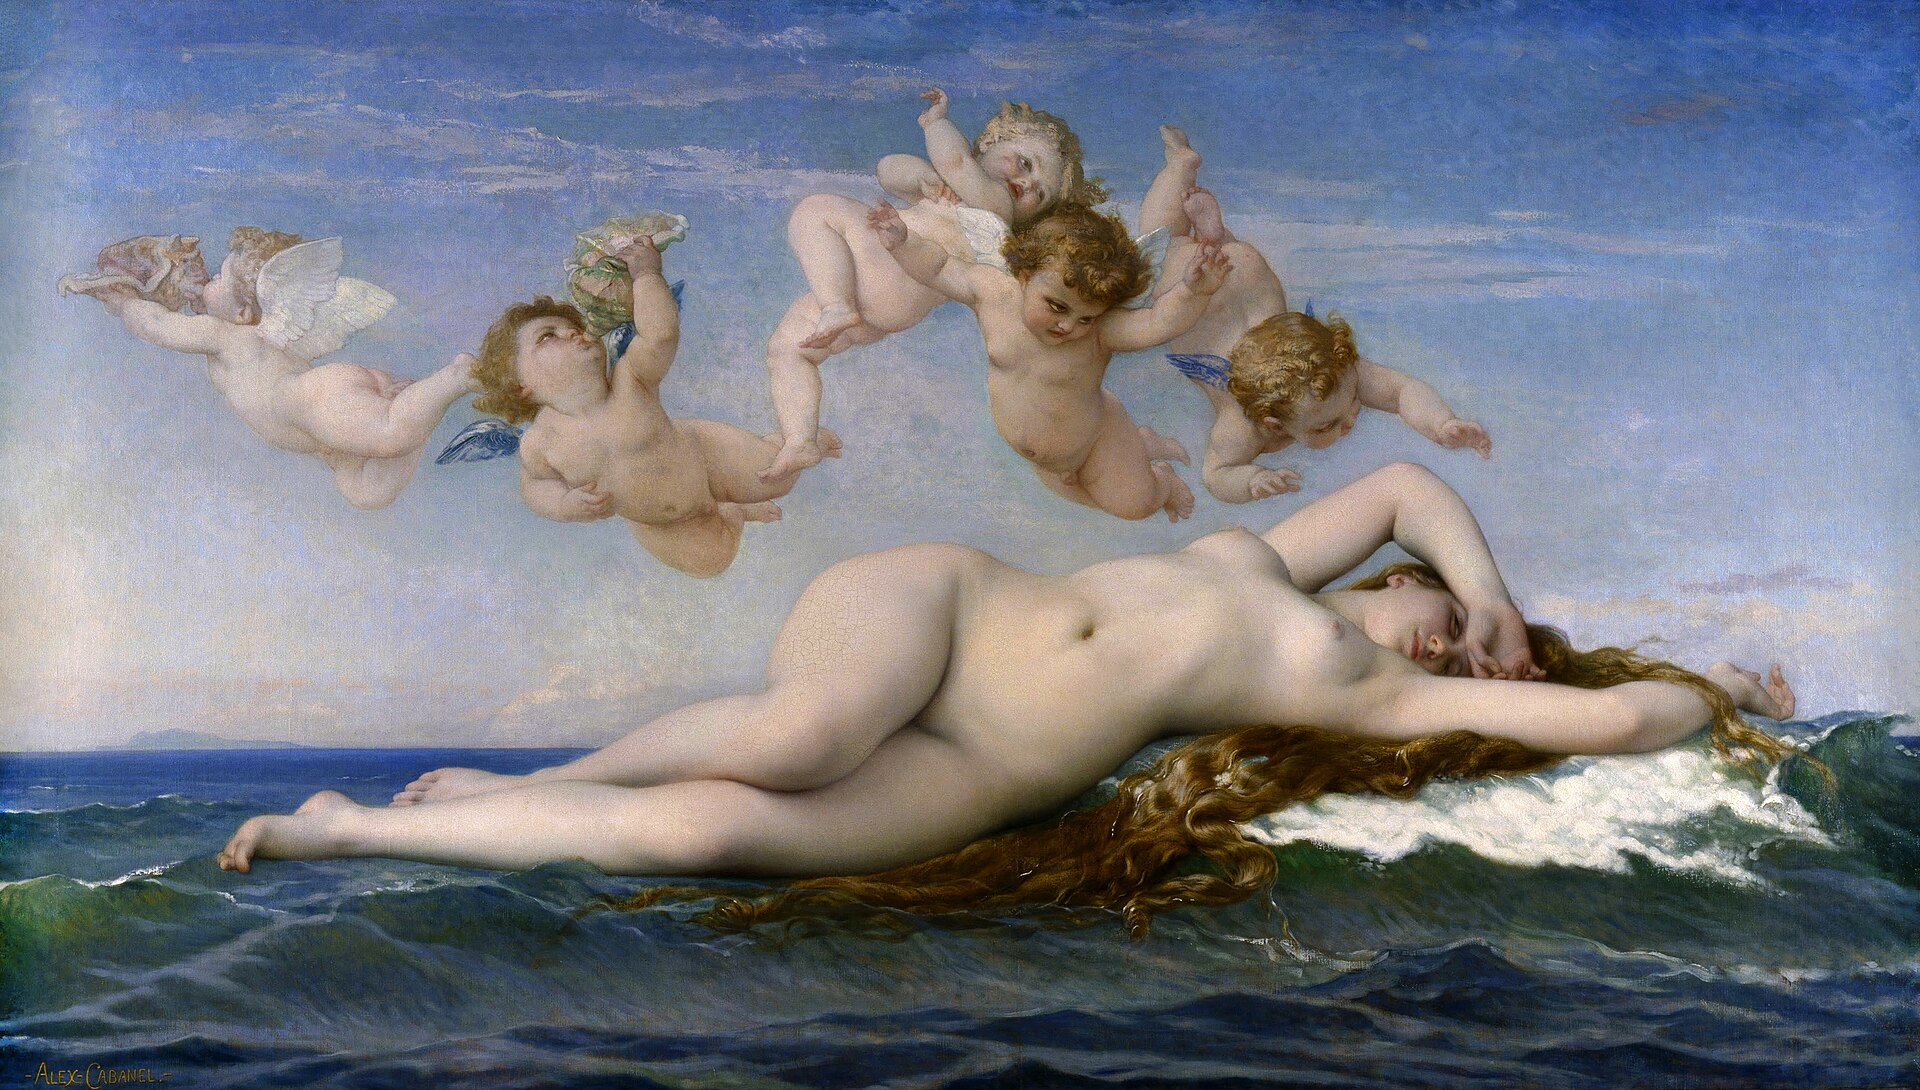 A nude venus floats on the waves as if she has just woken up while small putti frolic in the sky above her blowing conch shells